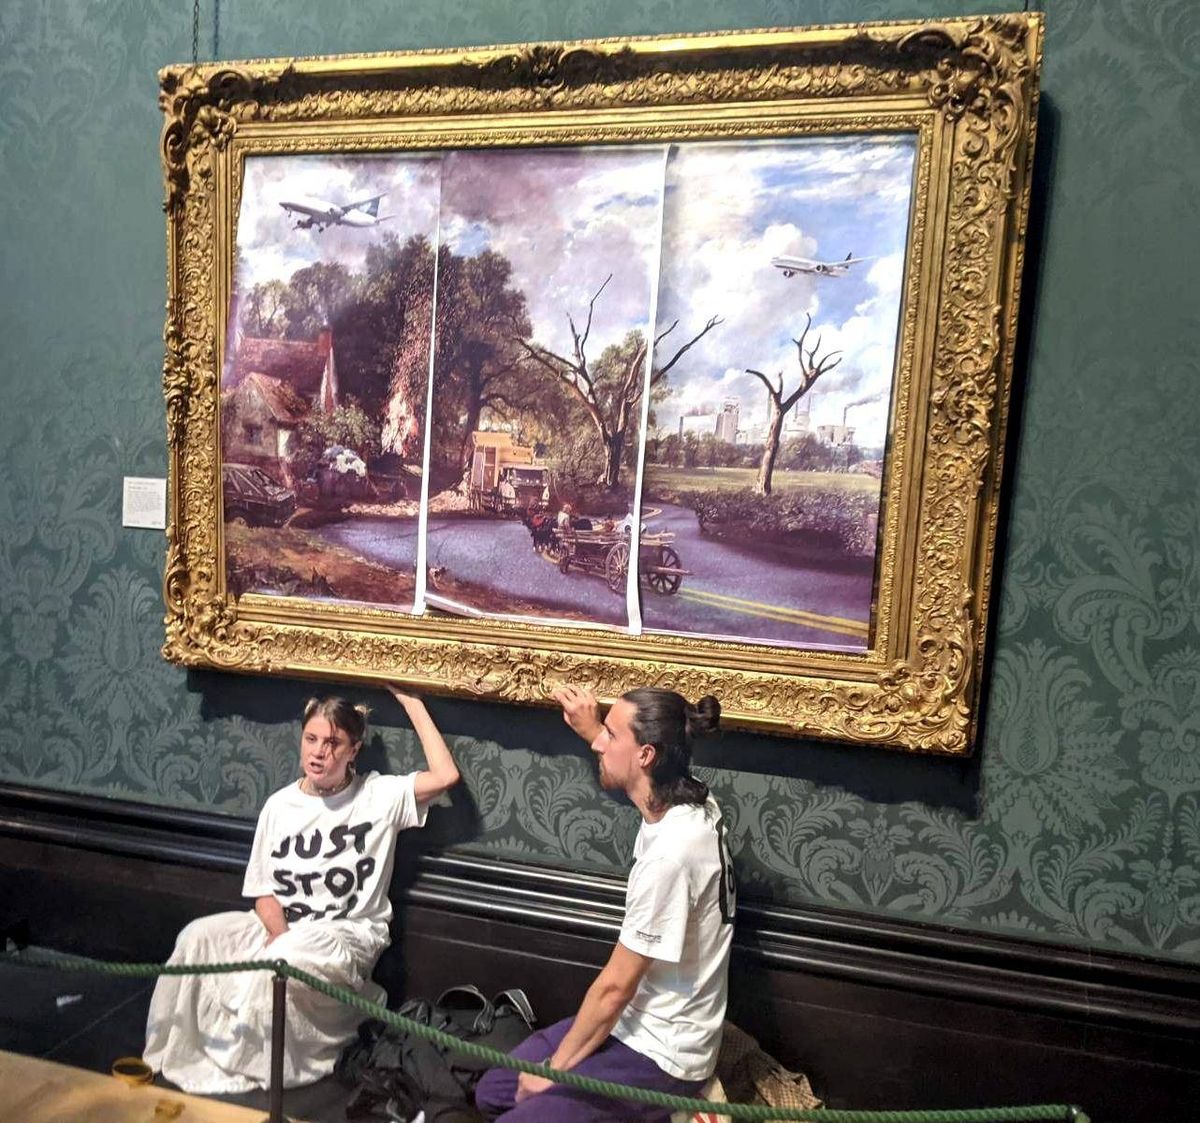 Hannah Hunt and Eben Lazarus, two young activists from Brighton, glued themselves to the Constable painting as part of the Just Stop Oil climate protest